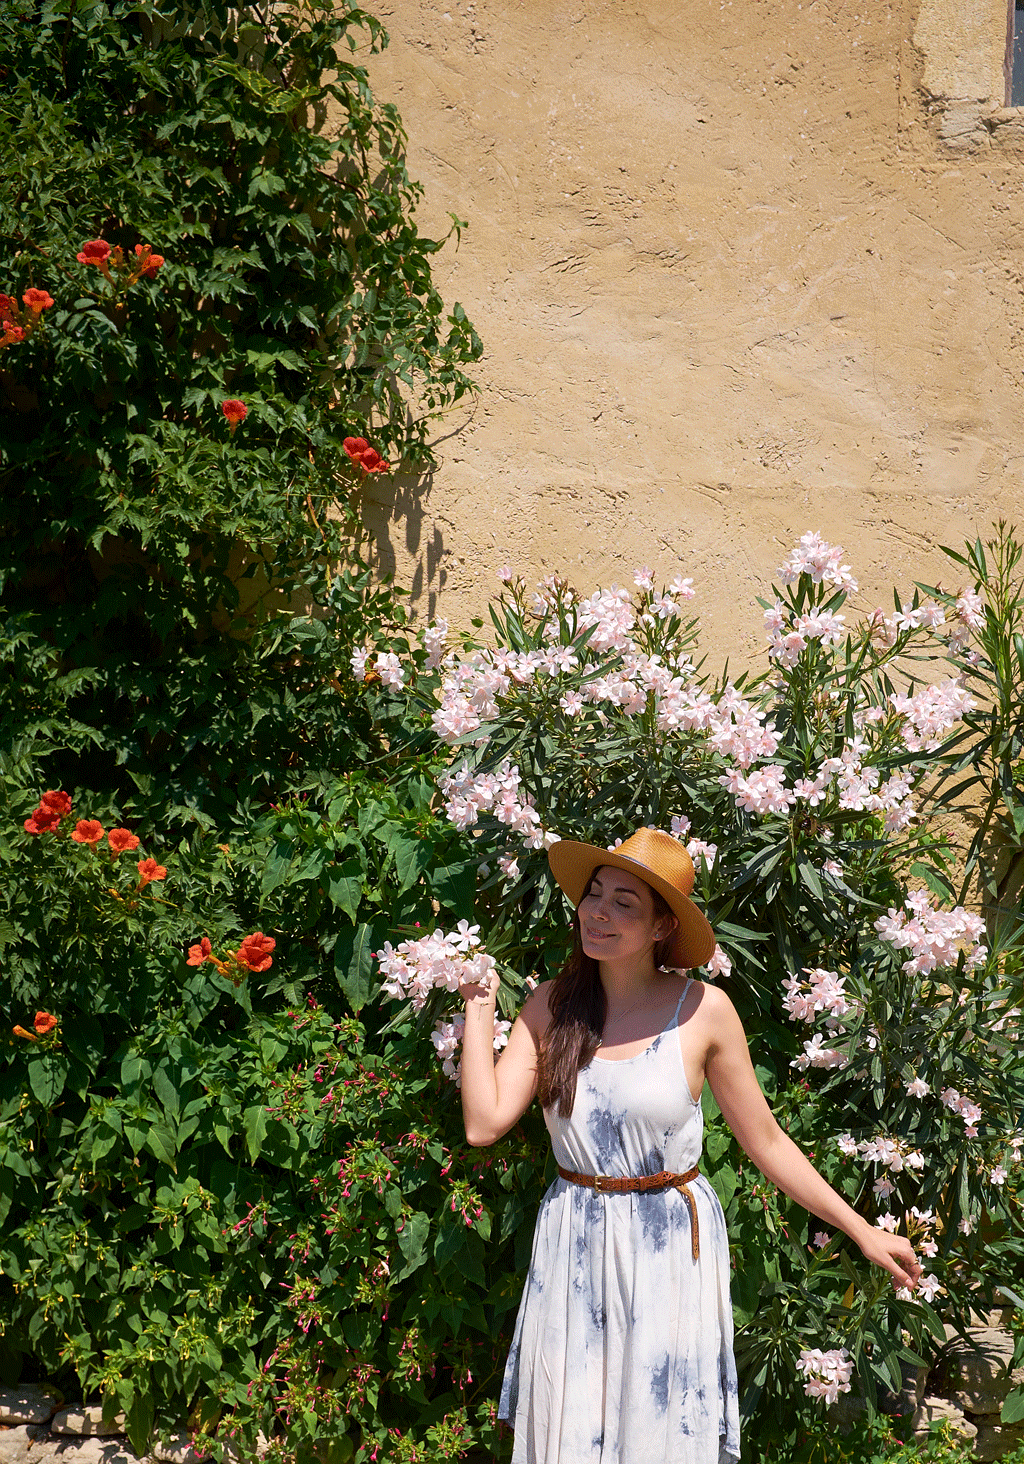 She's So Bright - Among the Wildflowers of Gordes